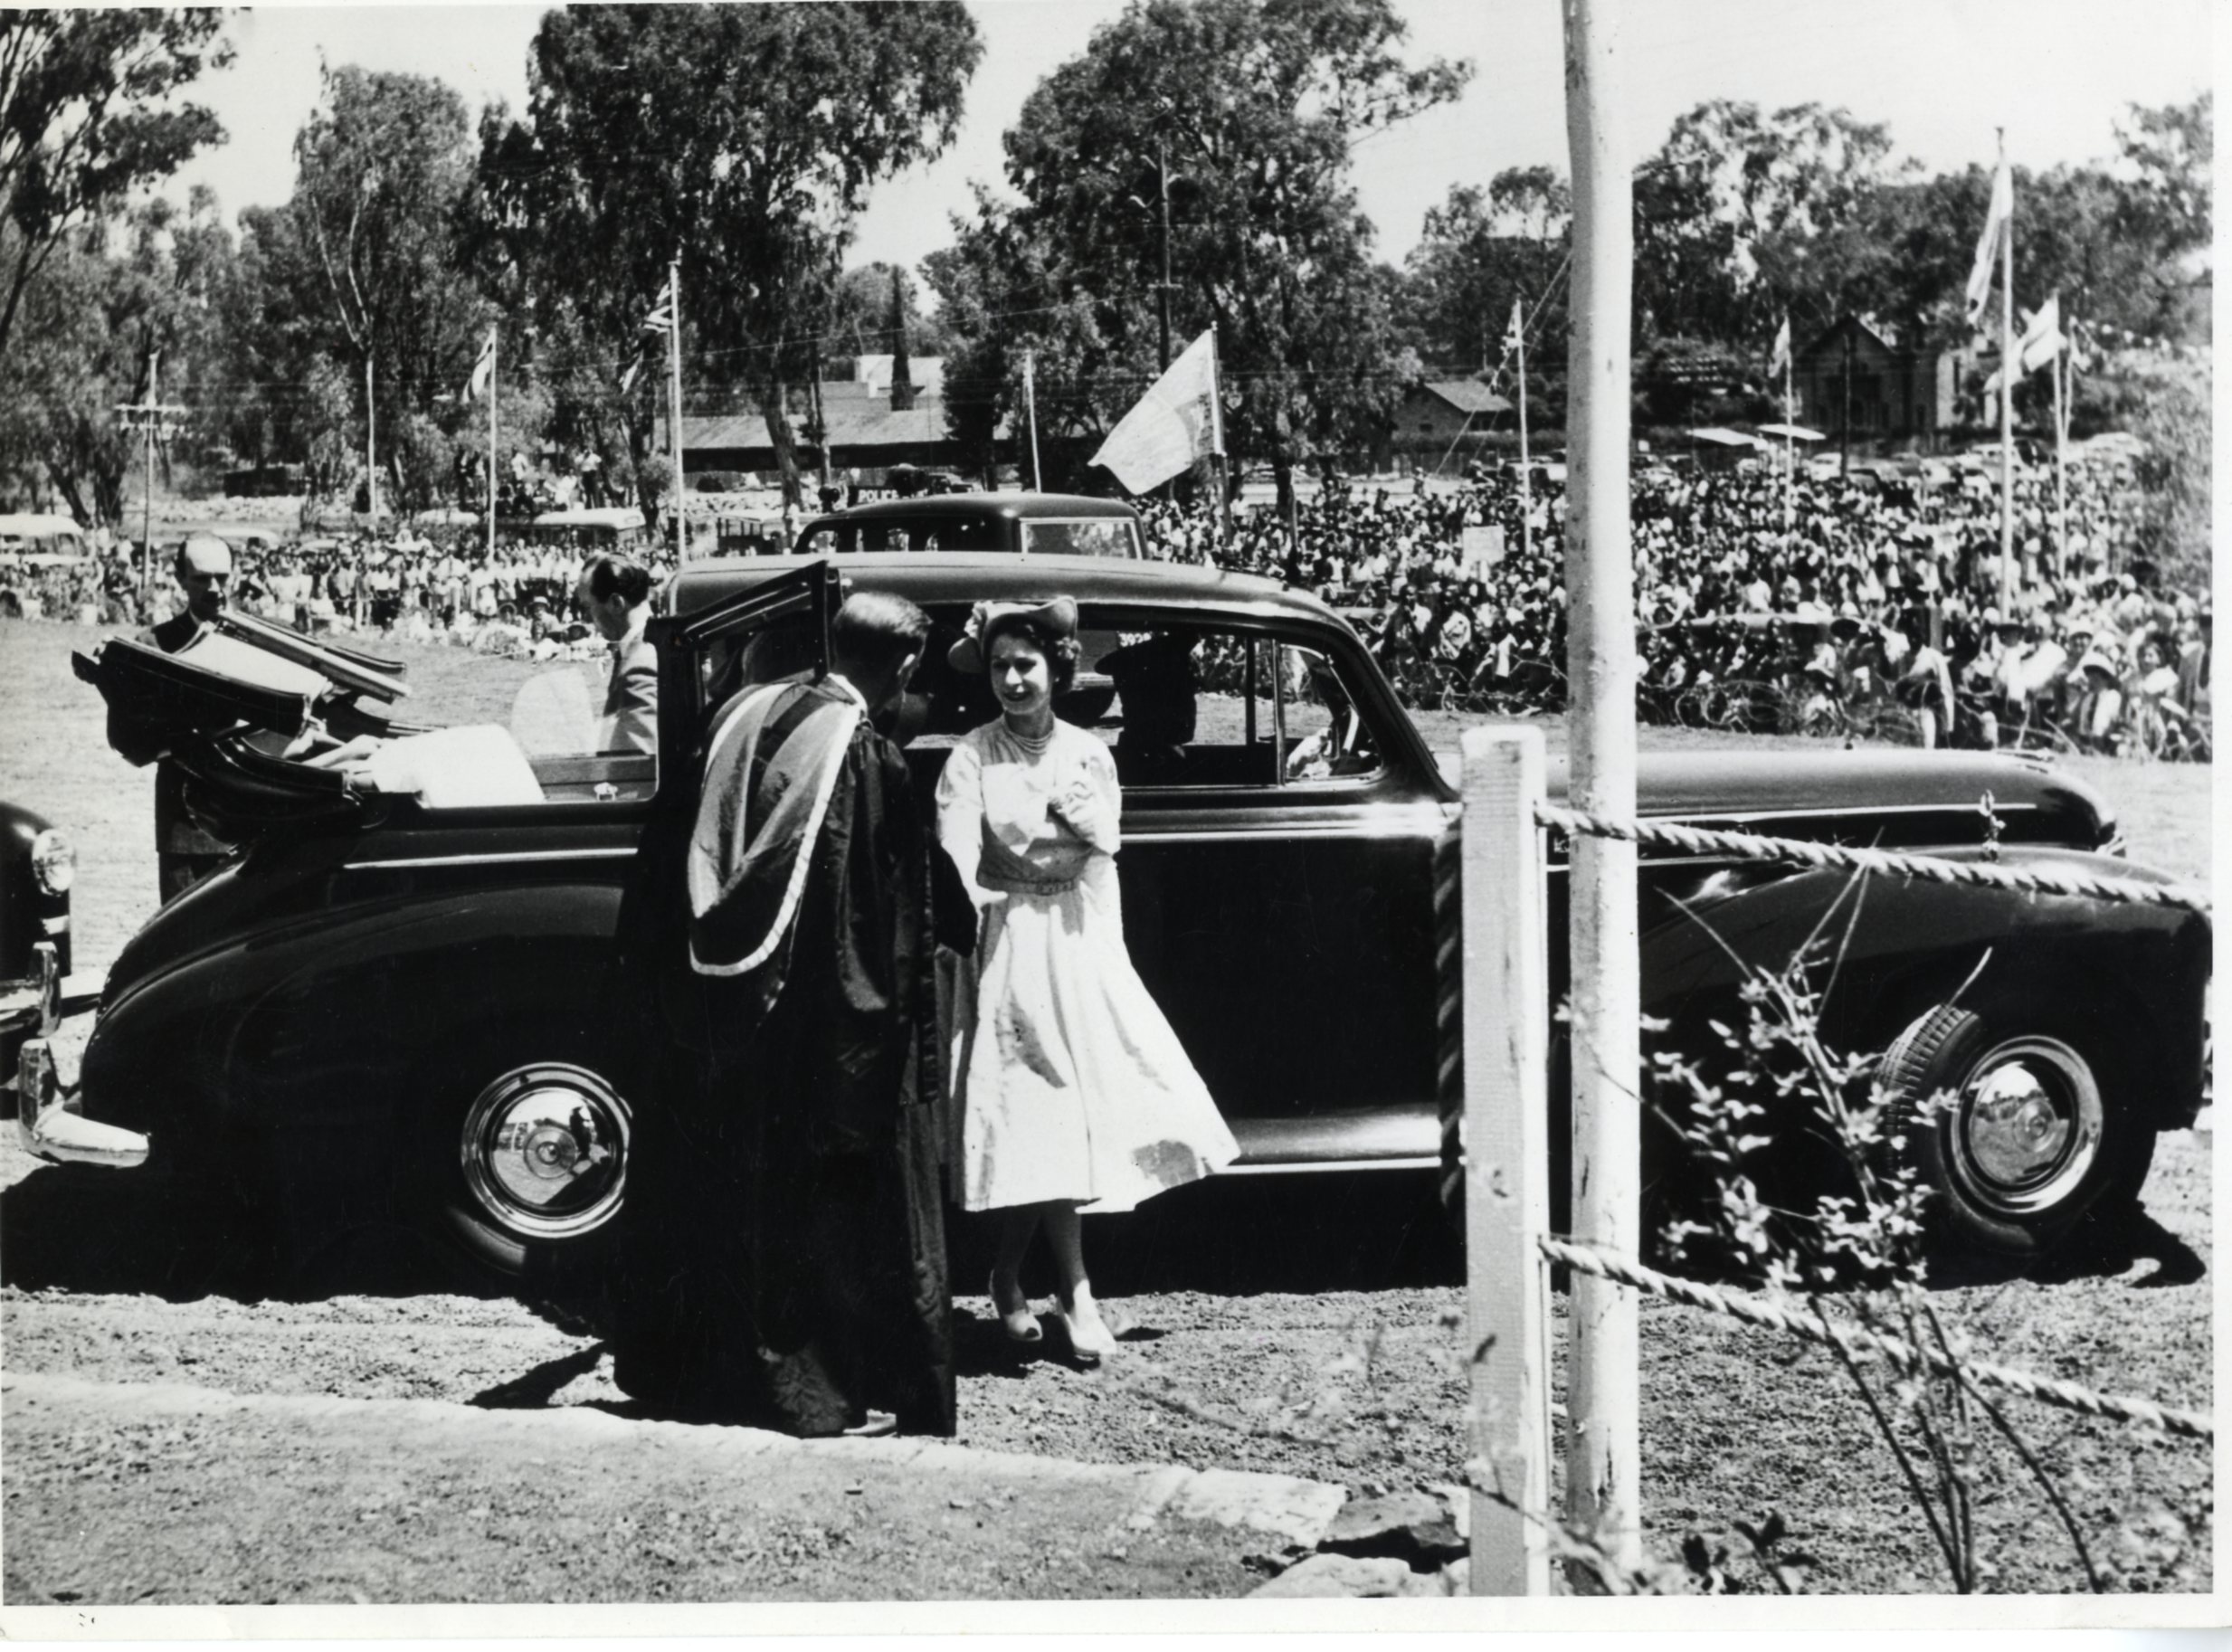 A black and white photograph of the queen stepping out of a car and being greeted by a man in ceremonial attire (possibly a priest). Crowds are gathered and flags are waving in the background behind the car.